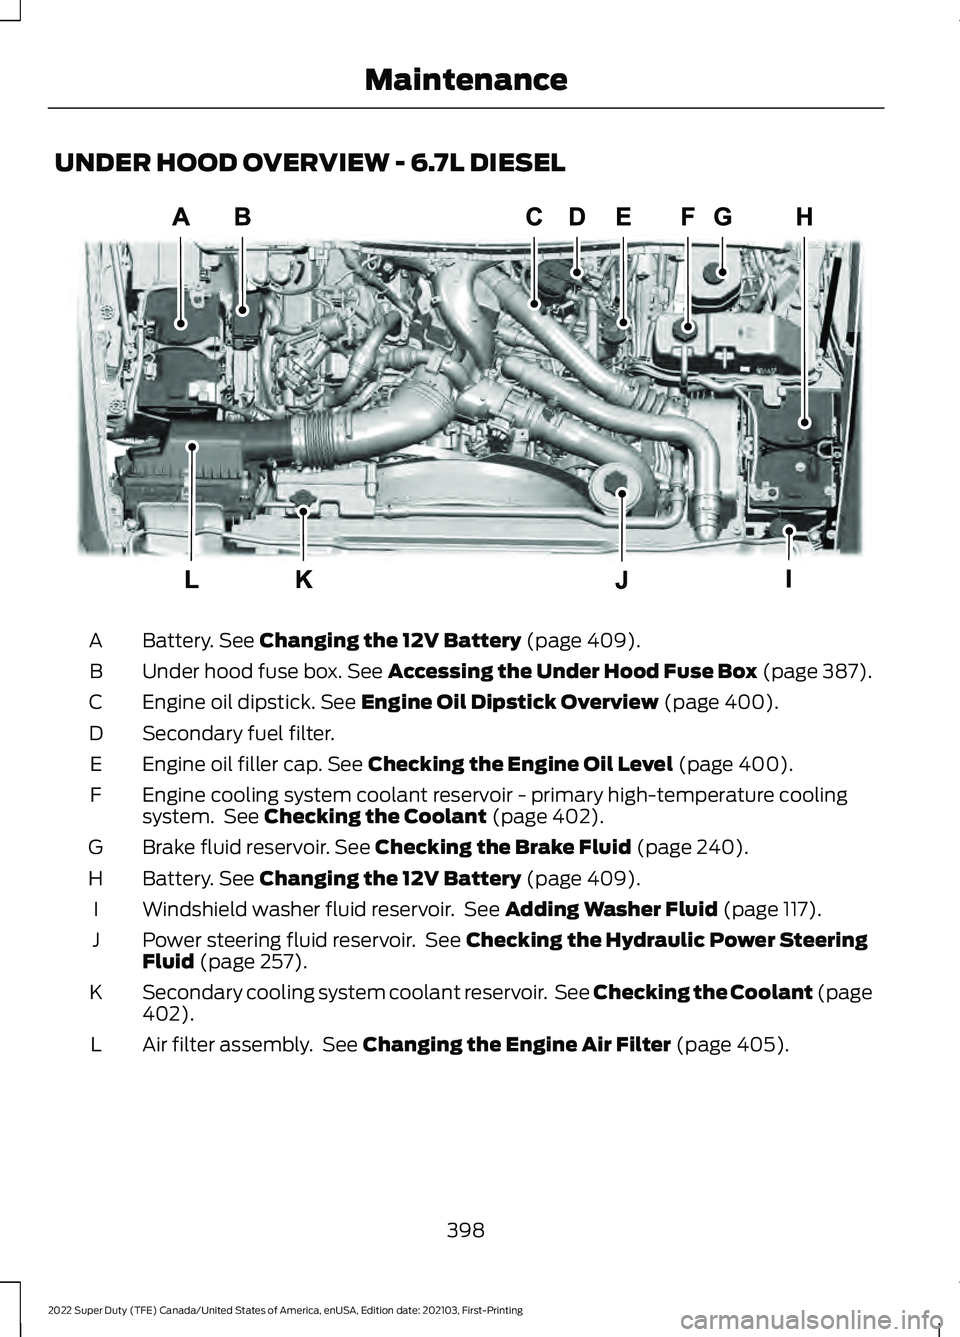 FORD F-250 2022  Owners Manual UNDER HOOD OVERVIEW - 6.7L DIESEL
Battery. See Changing the 12V Battery (page 409).
A
Under hood fuse box.
 See Accessing the Under Hood Fuse Box (page 387).
B
Engine oil dipstick.
 See Engine Oil Dip